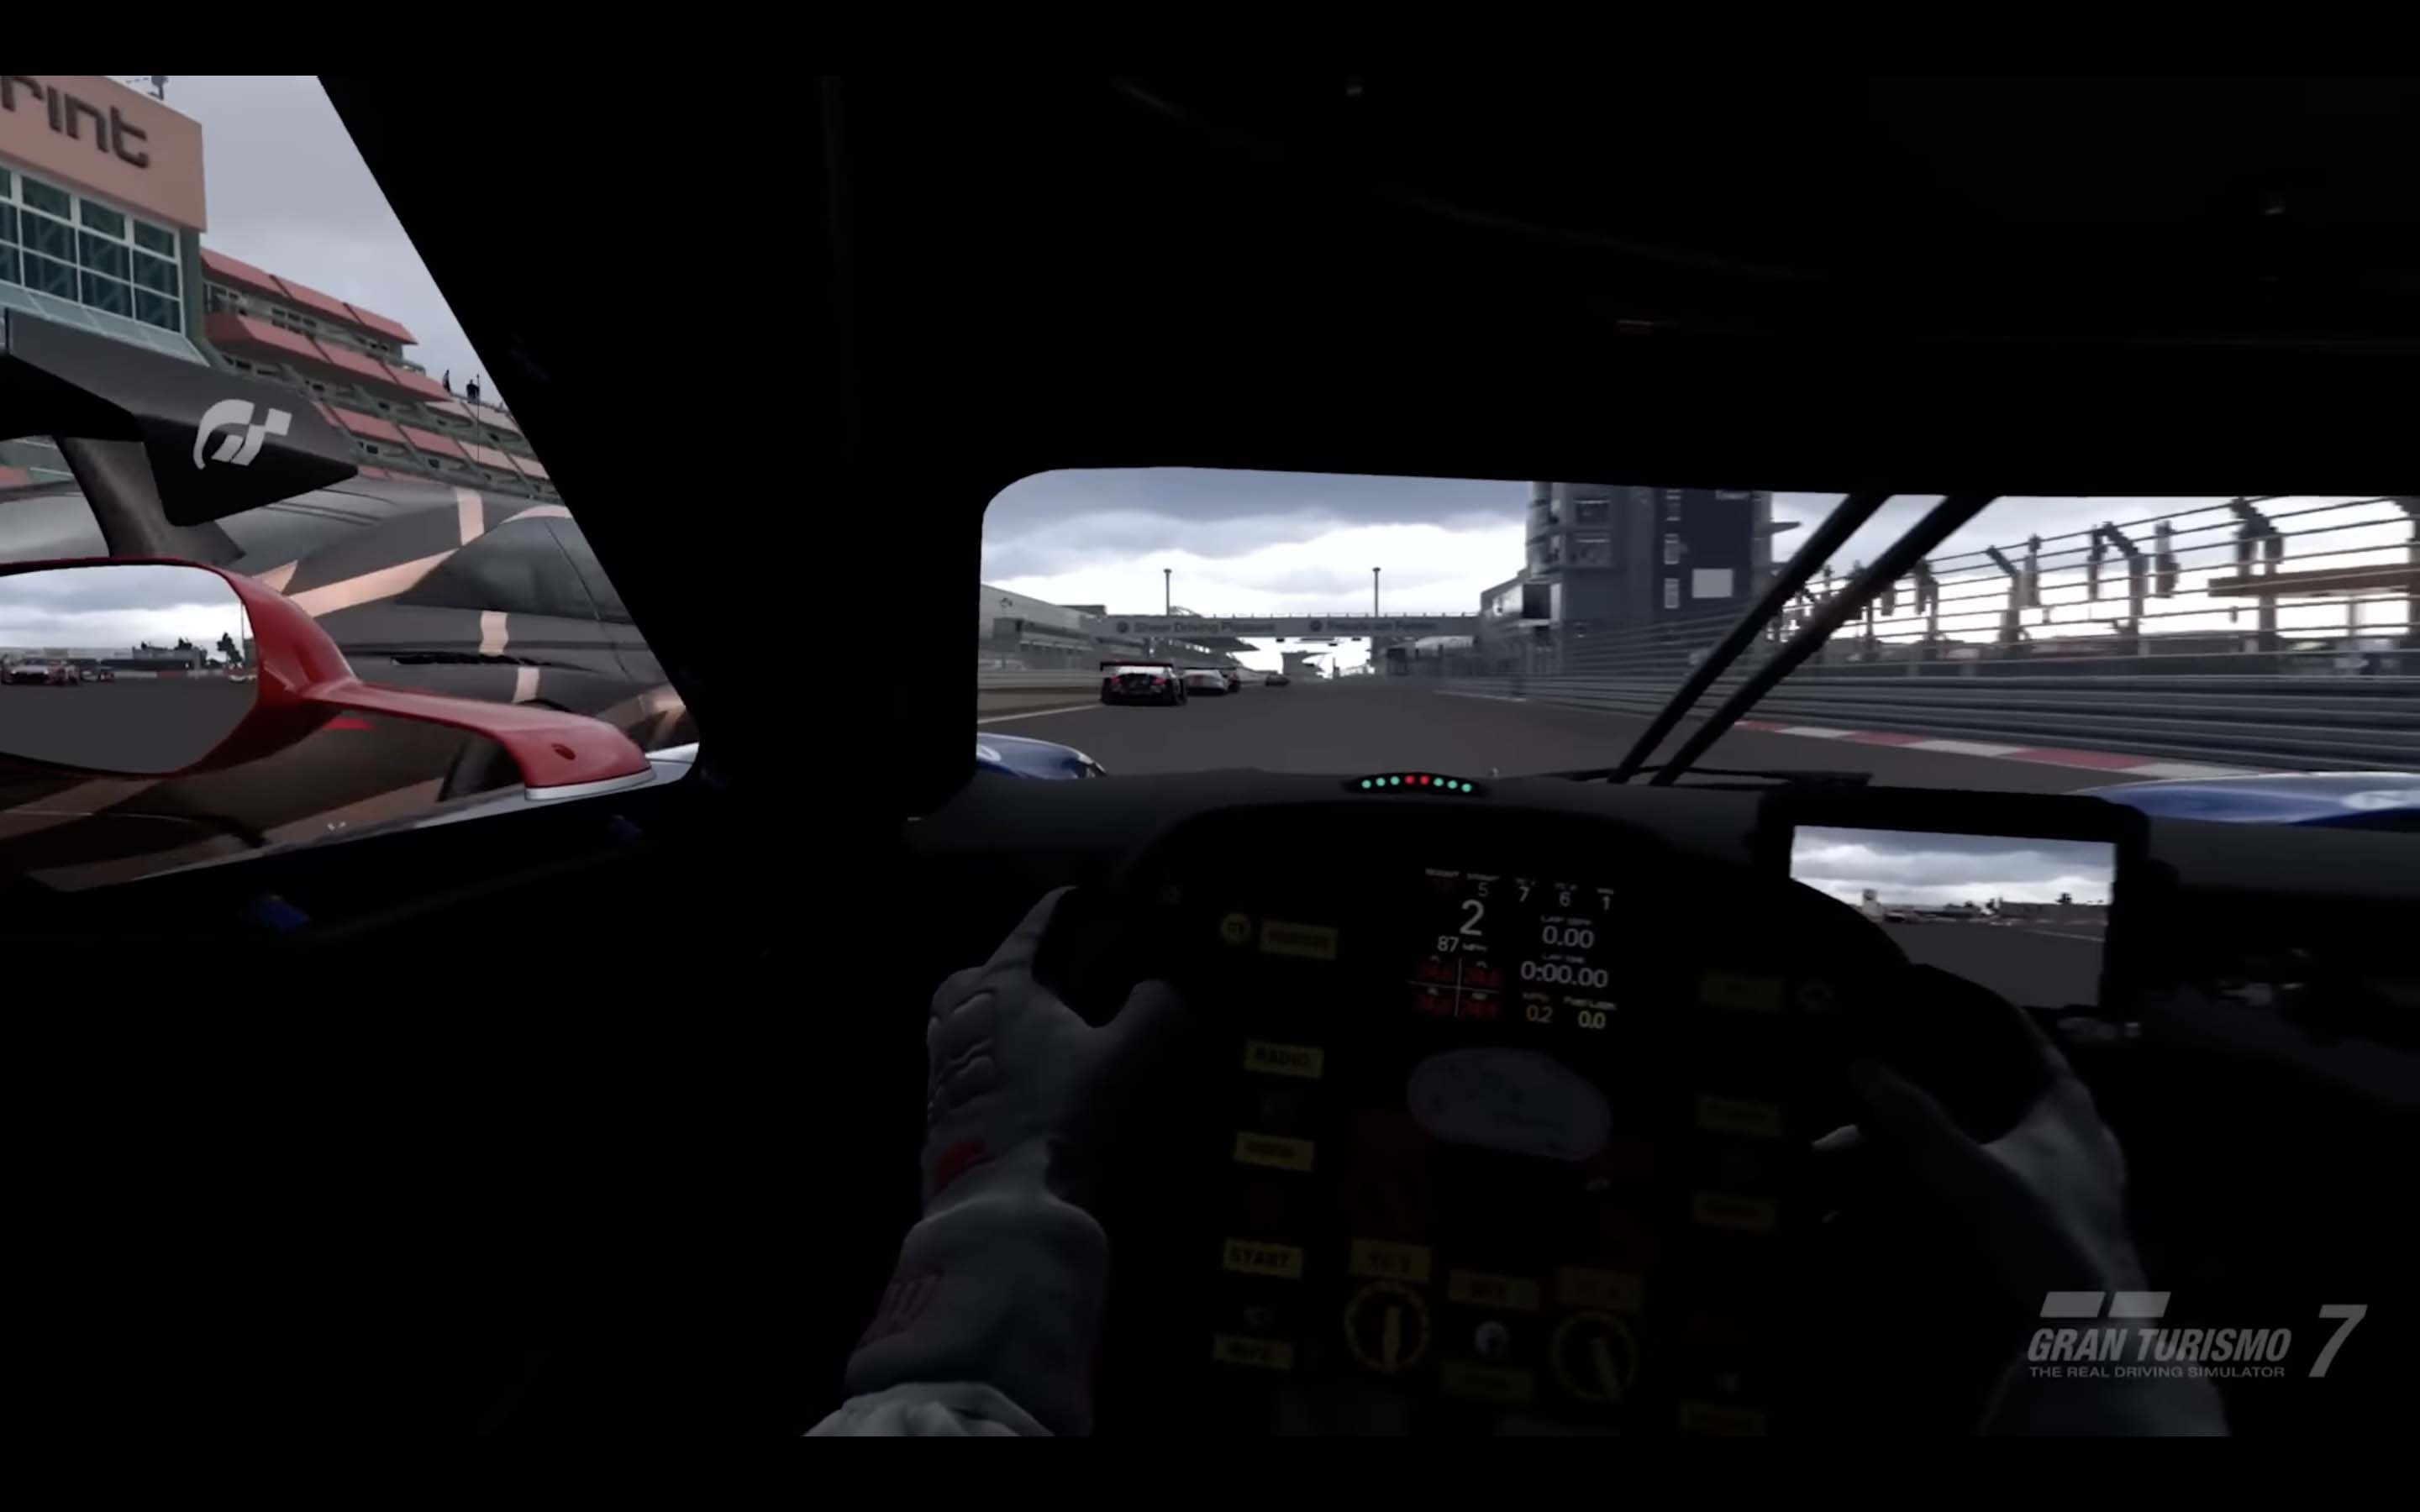 Gran Turismo 7 VR Looks and Feels Amazing, According to People